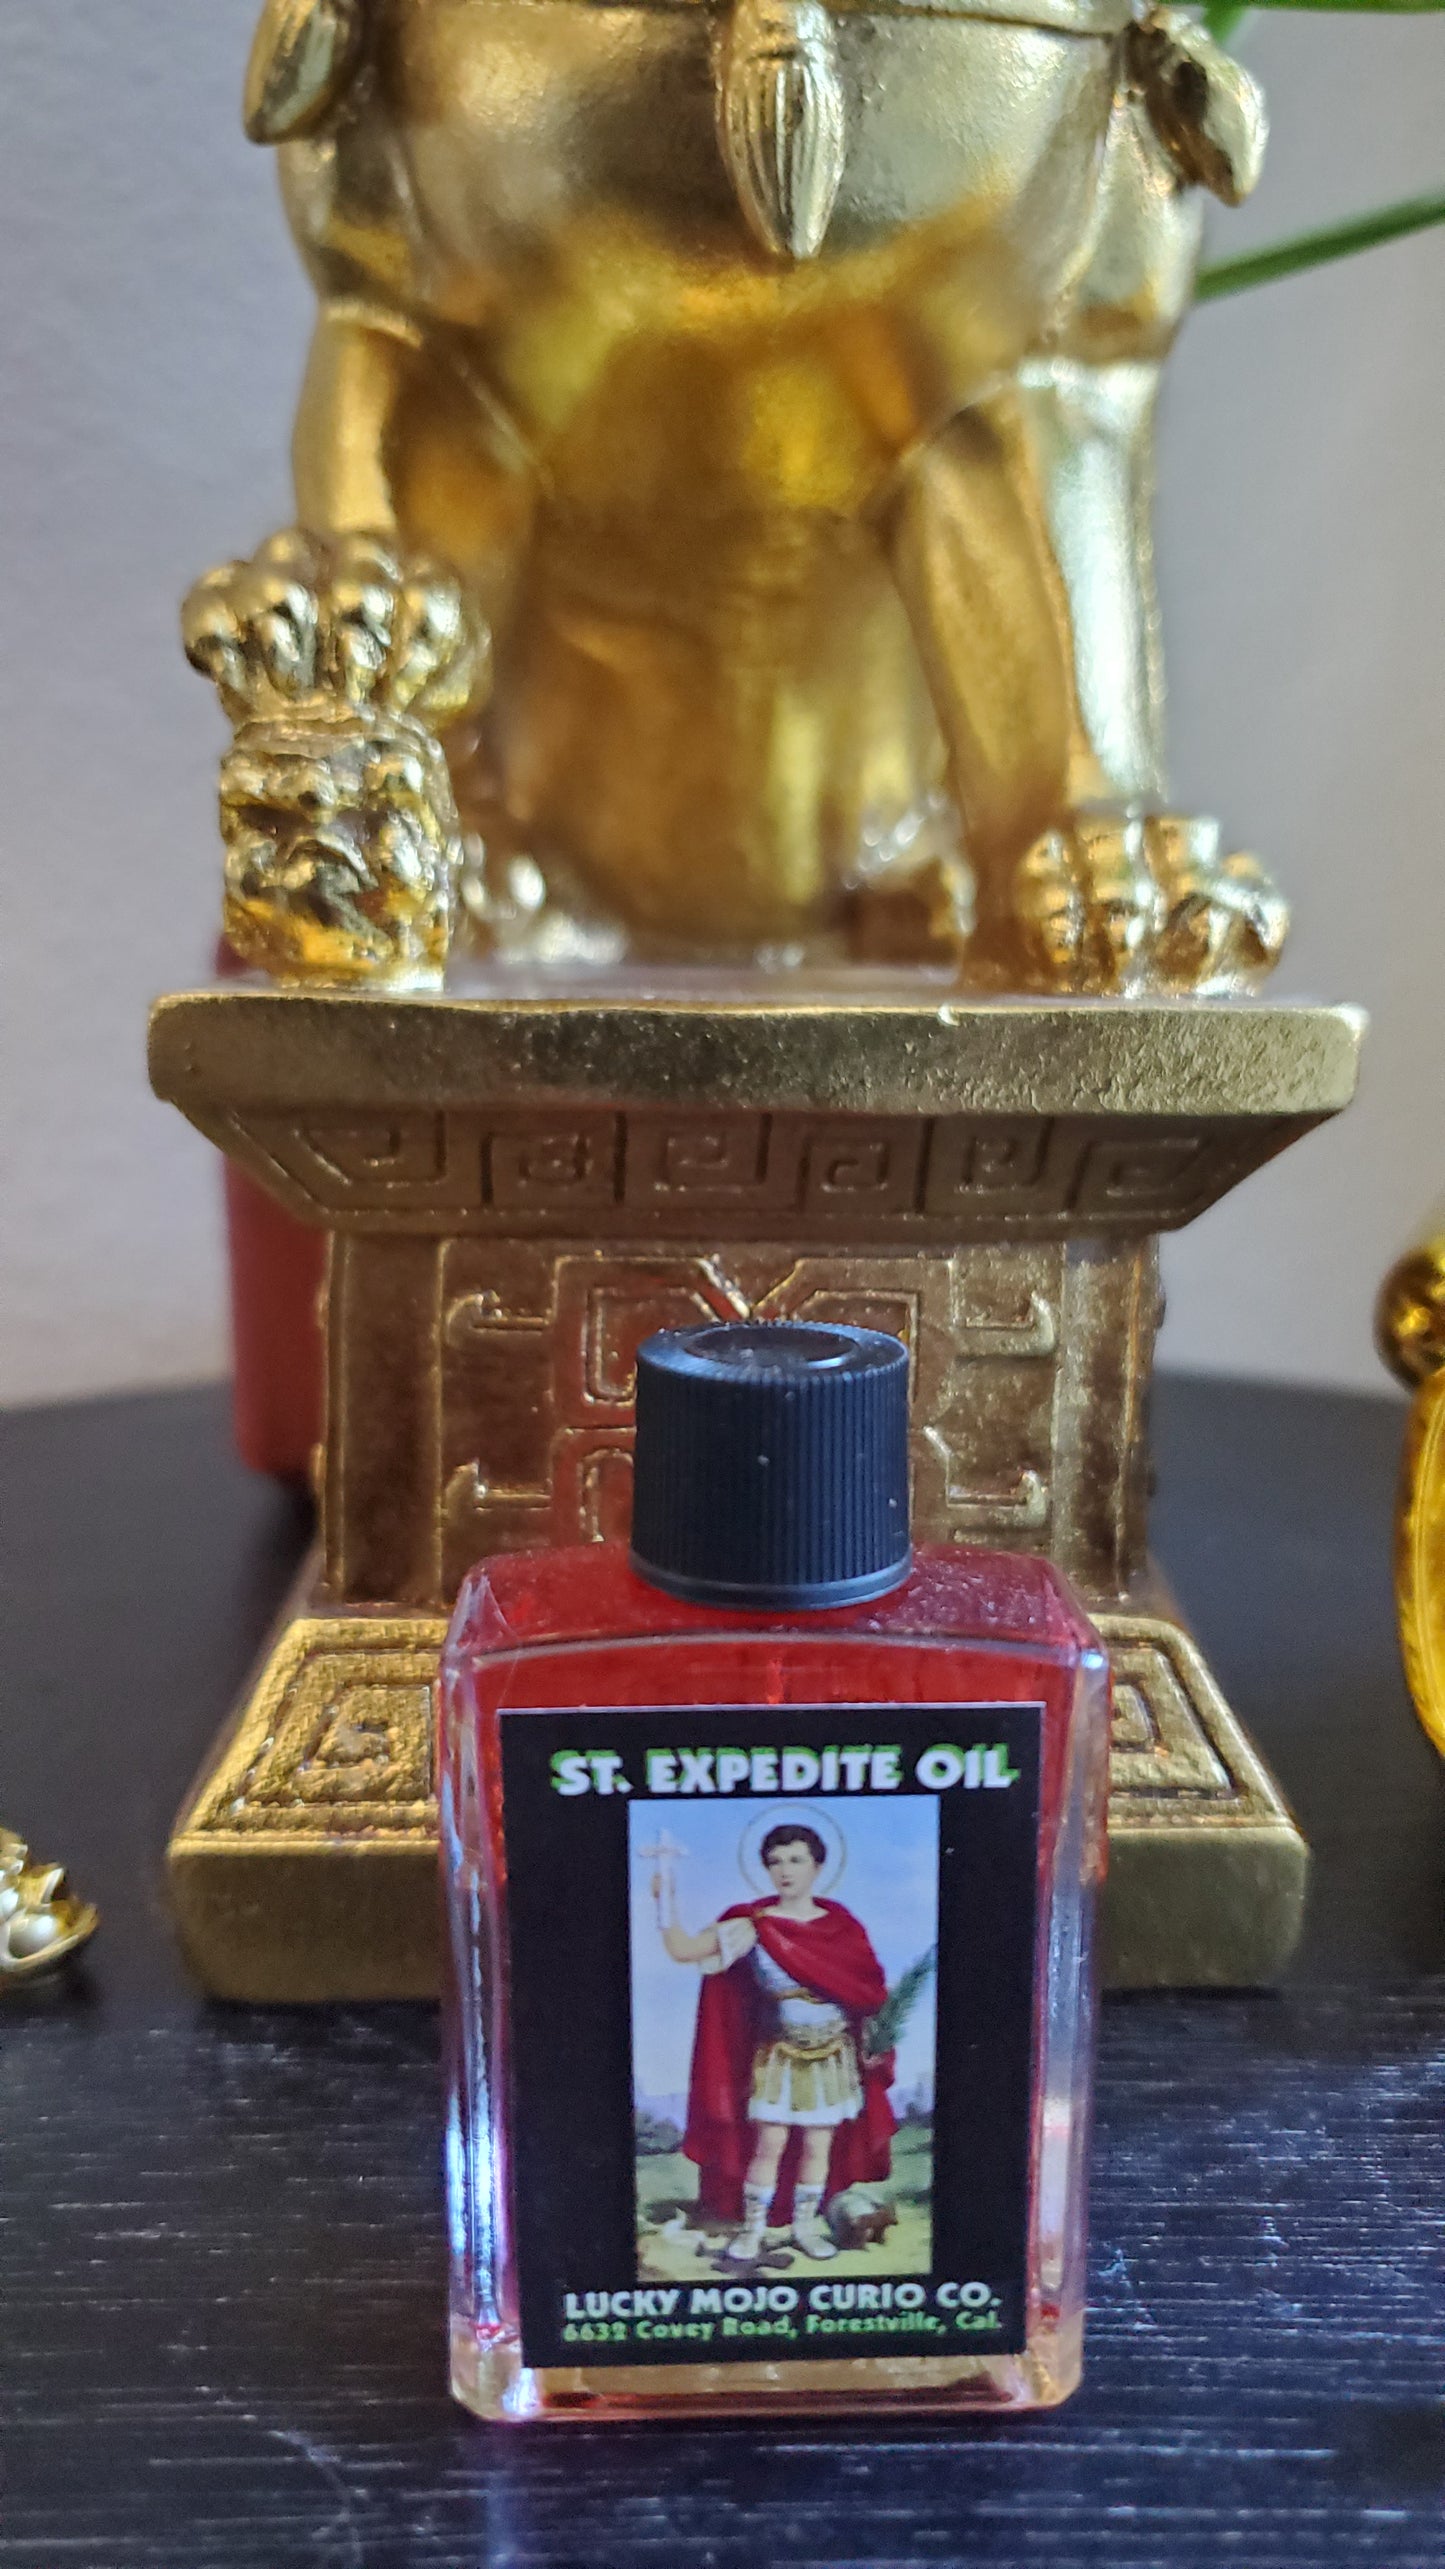 LuckyMojoCurioCo "St. Expedite Oil" Anointing / Conjure Oil #Great Deal #LuckyMojoCurioCo #LuckyMojo #EffectiveOils #MoneyMagickOil